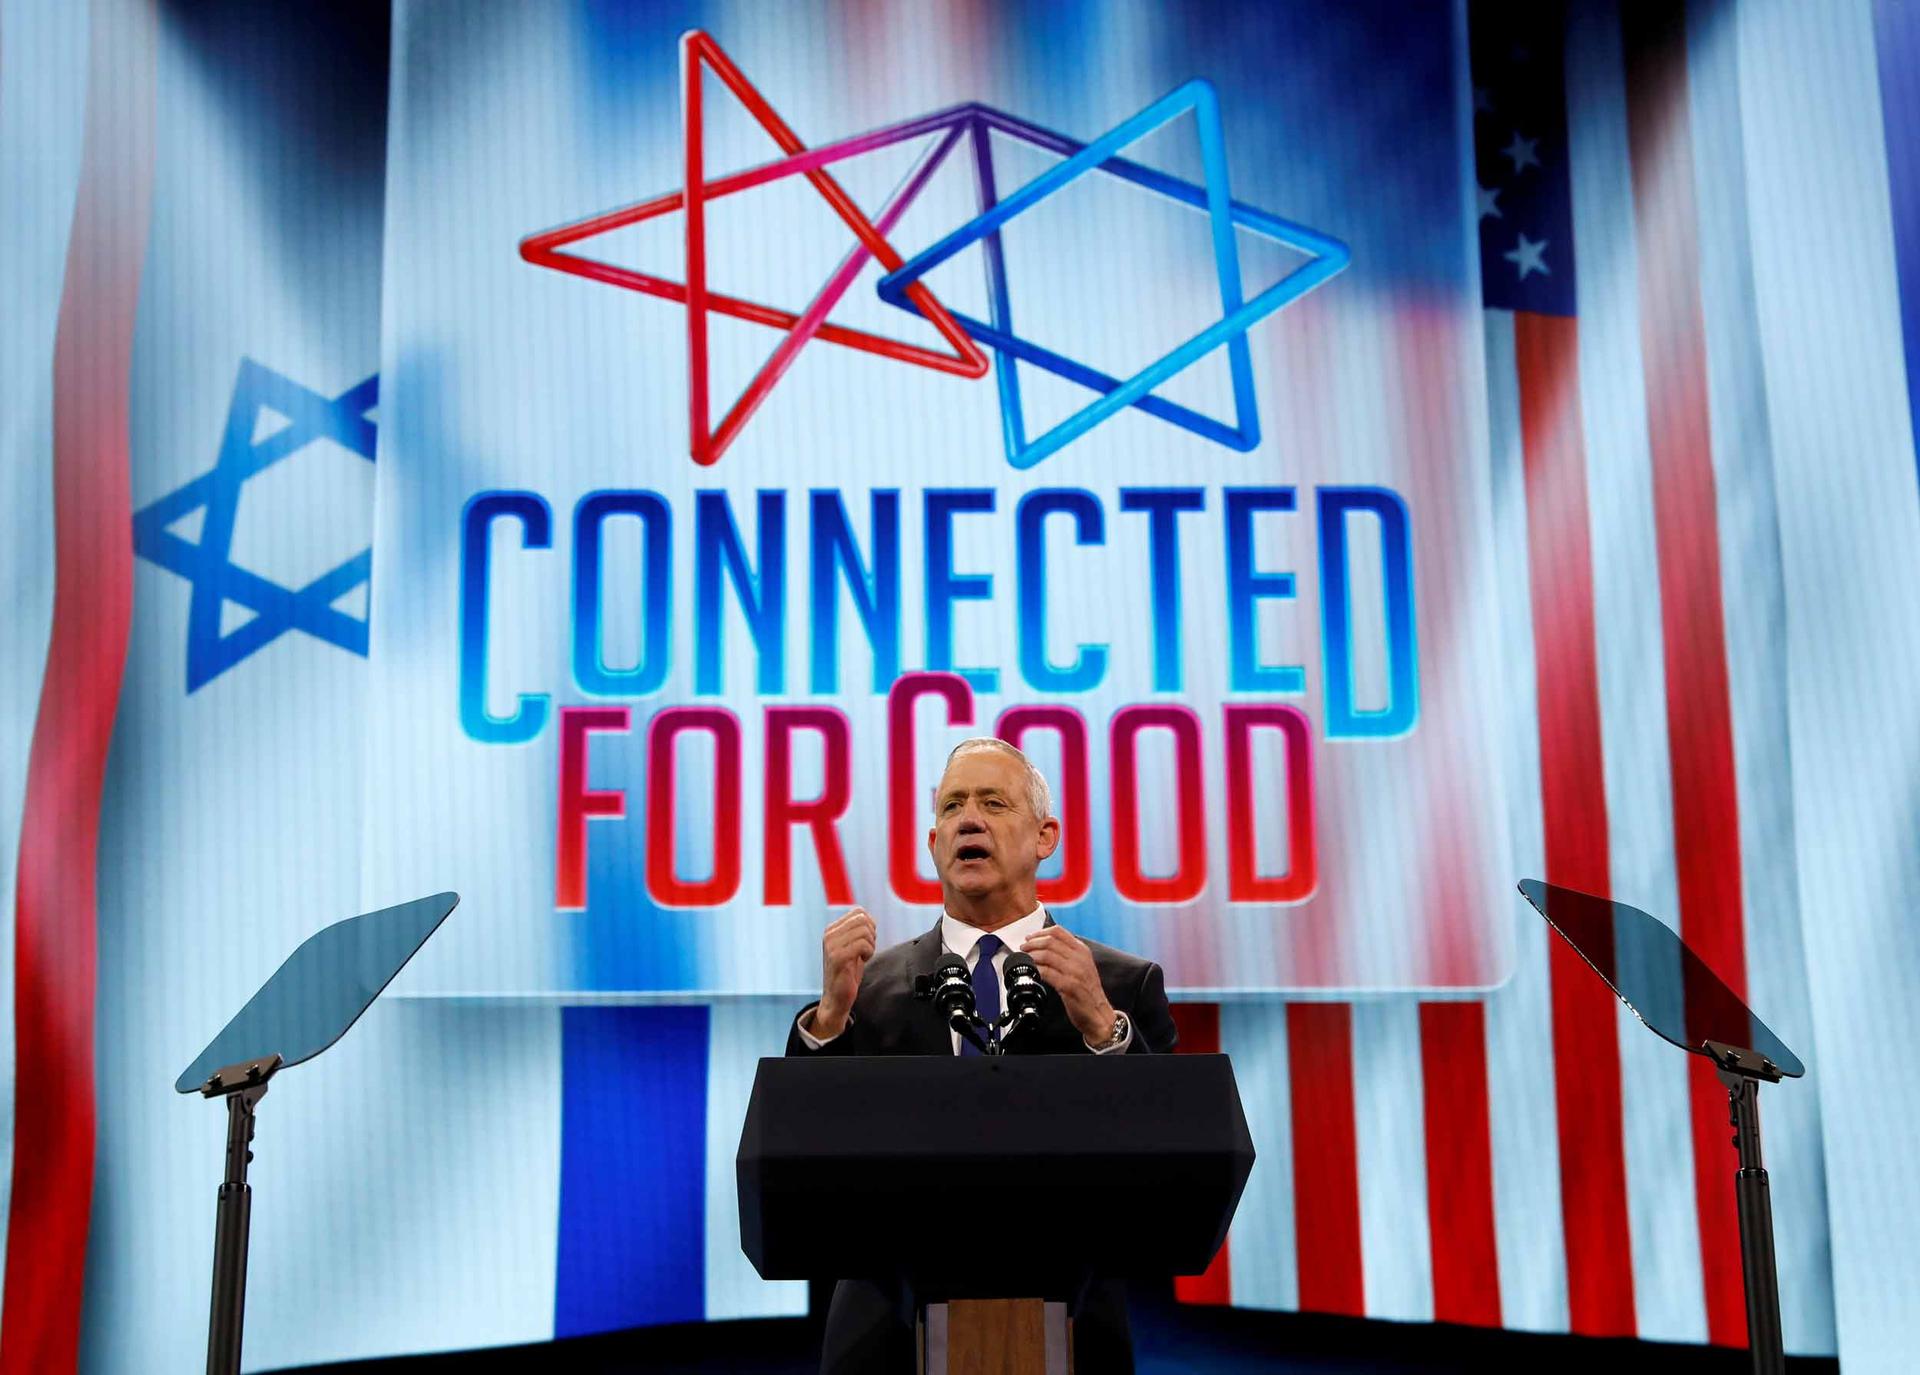 Israel's Blue and White party leader Benny Gantz speaks at AIPAC in Washington, DC, on March 25, 2019. The screen behind him says 